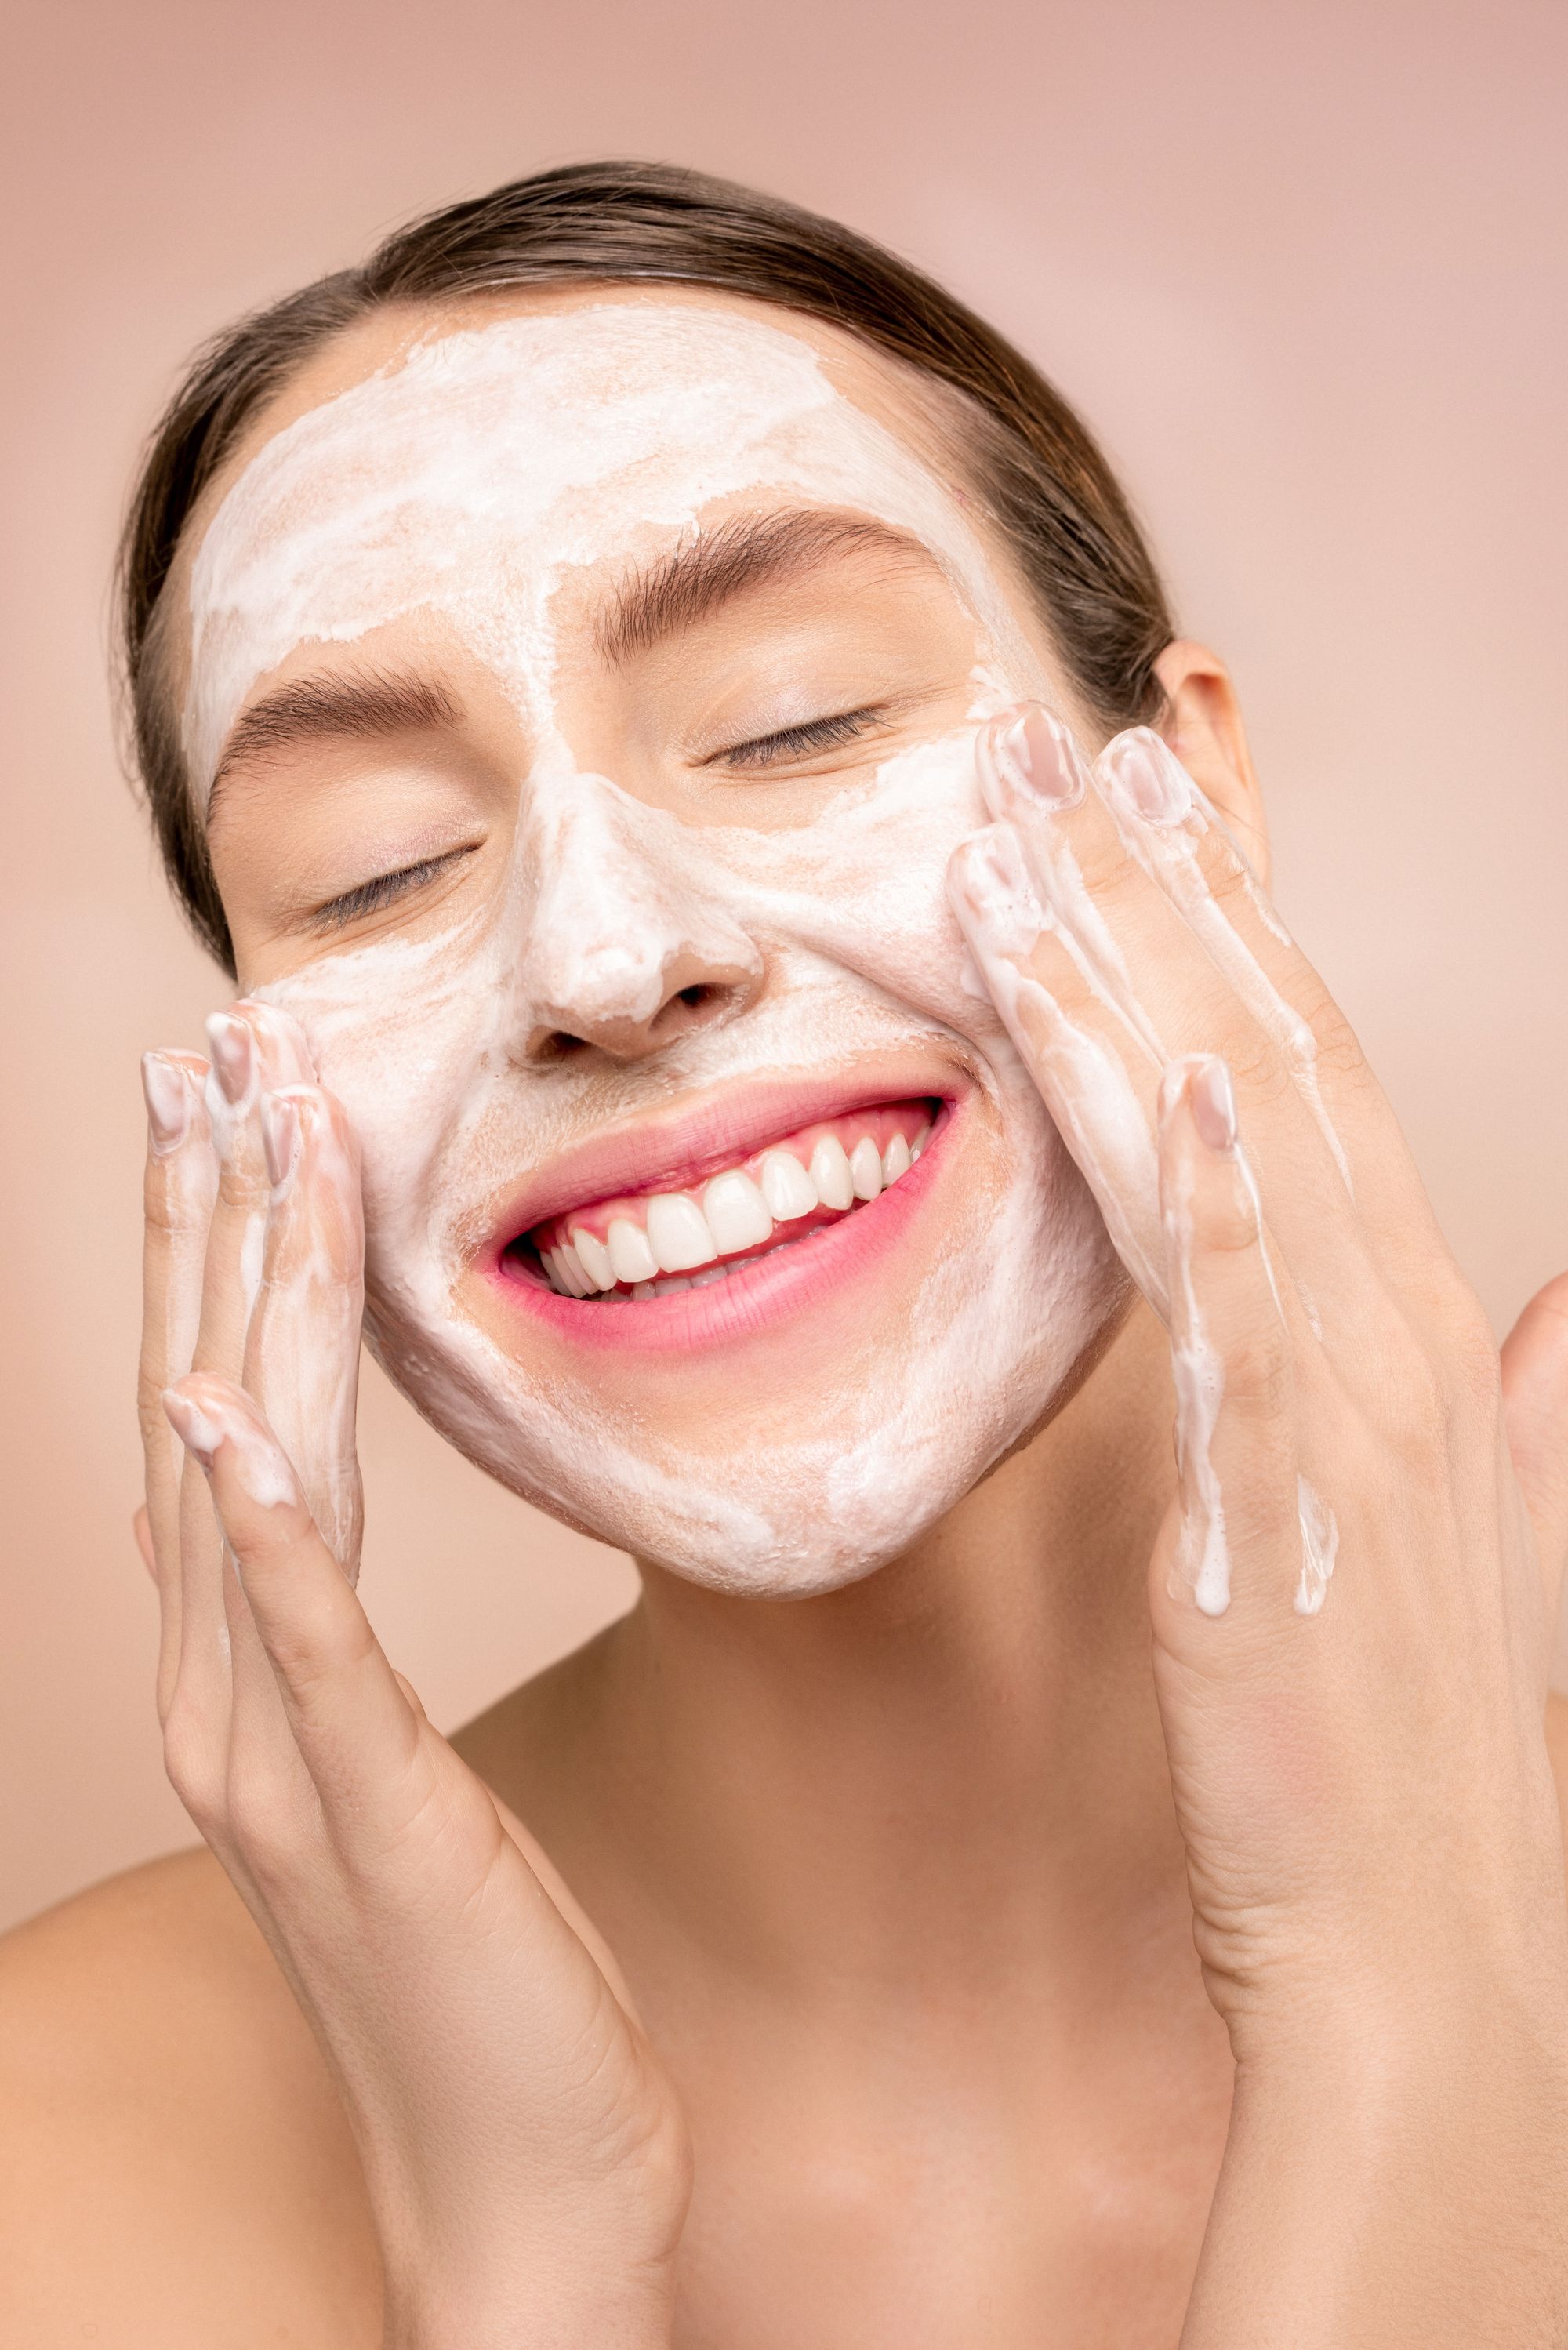 The 4 Best Skin Care Products for Acne Prone Skin